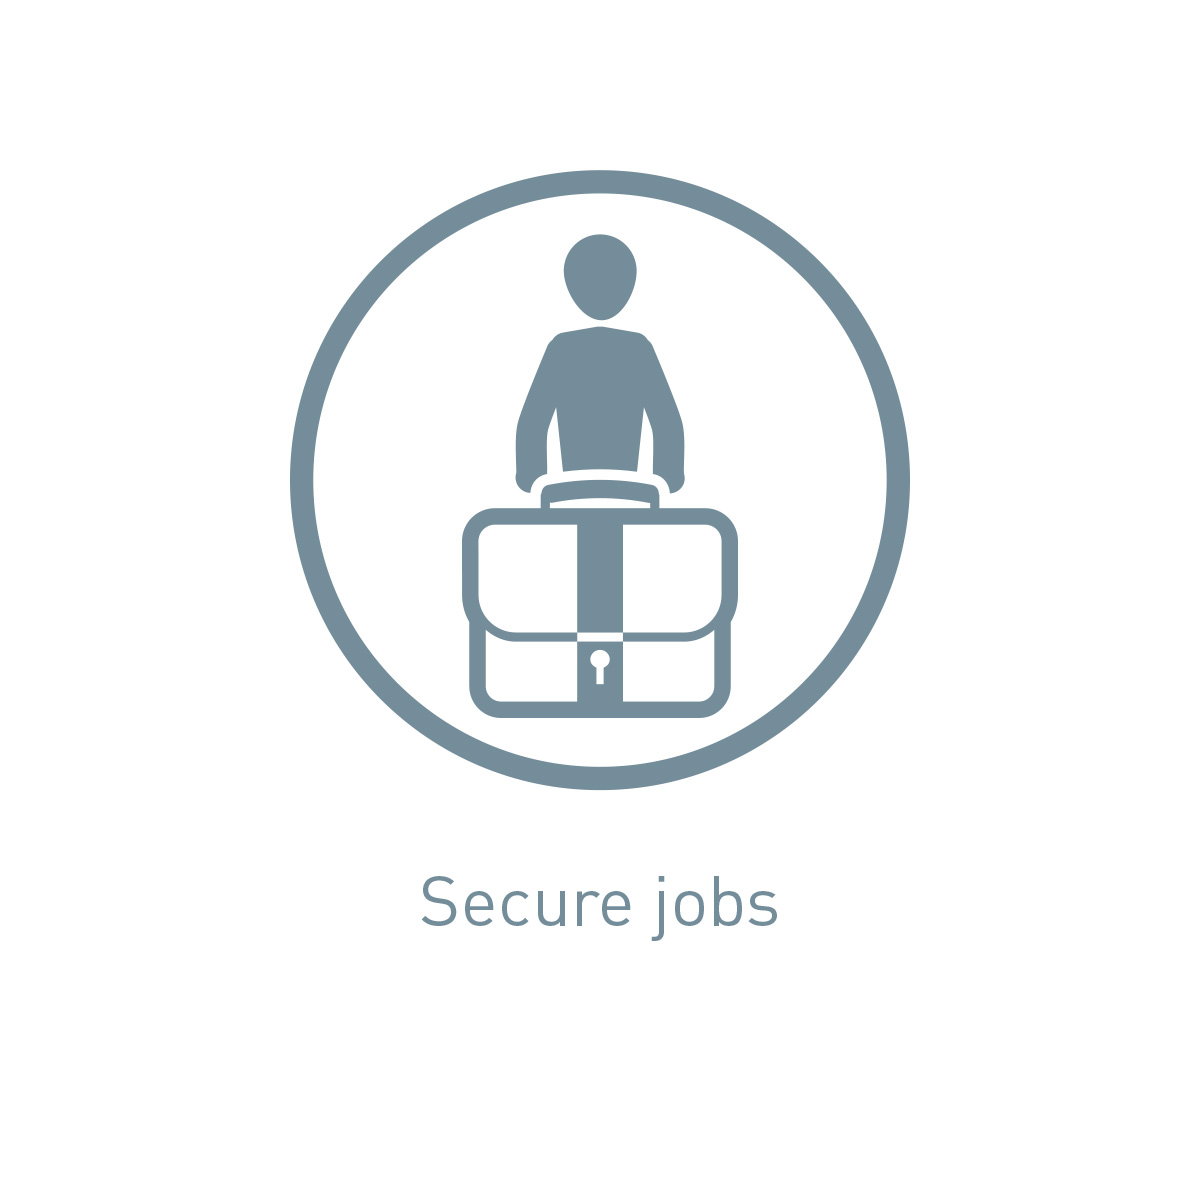 Icon Secure jobs